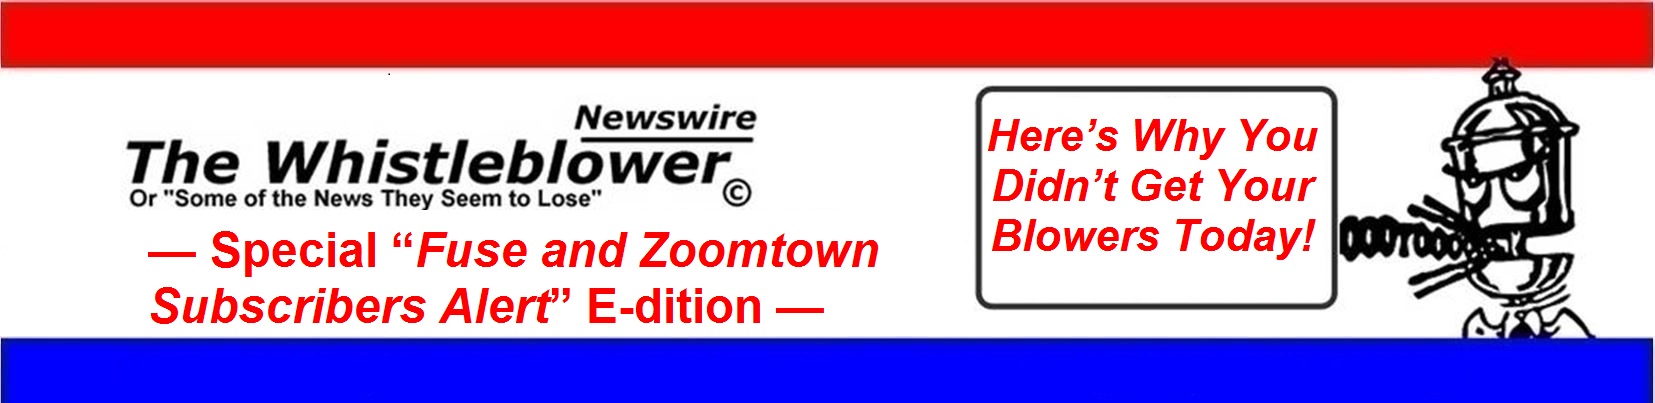 FEB 29 FUSE AND ZOOMTOWN ALERT